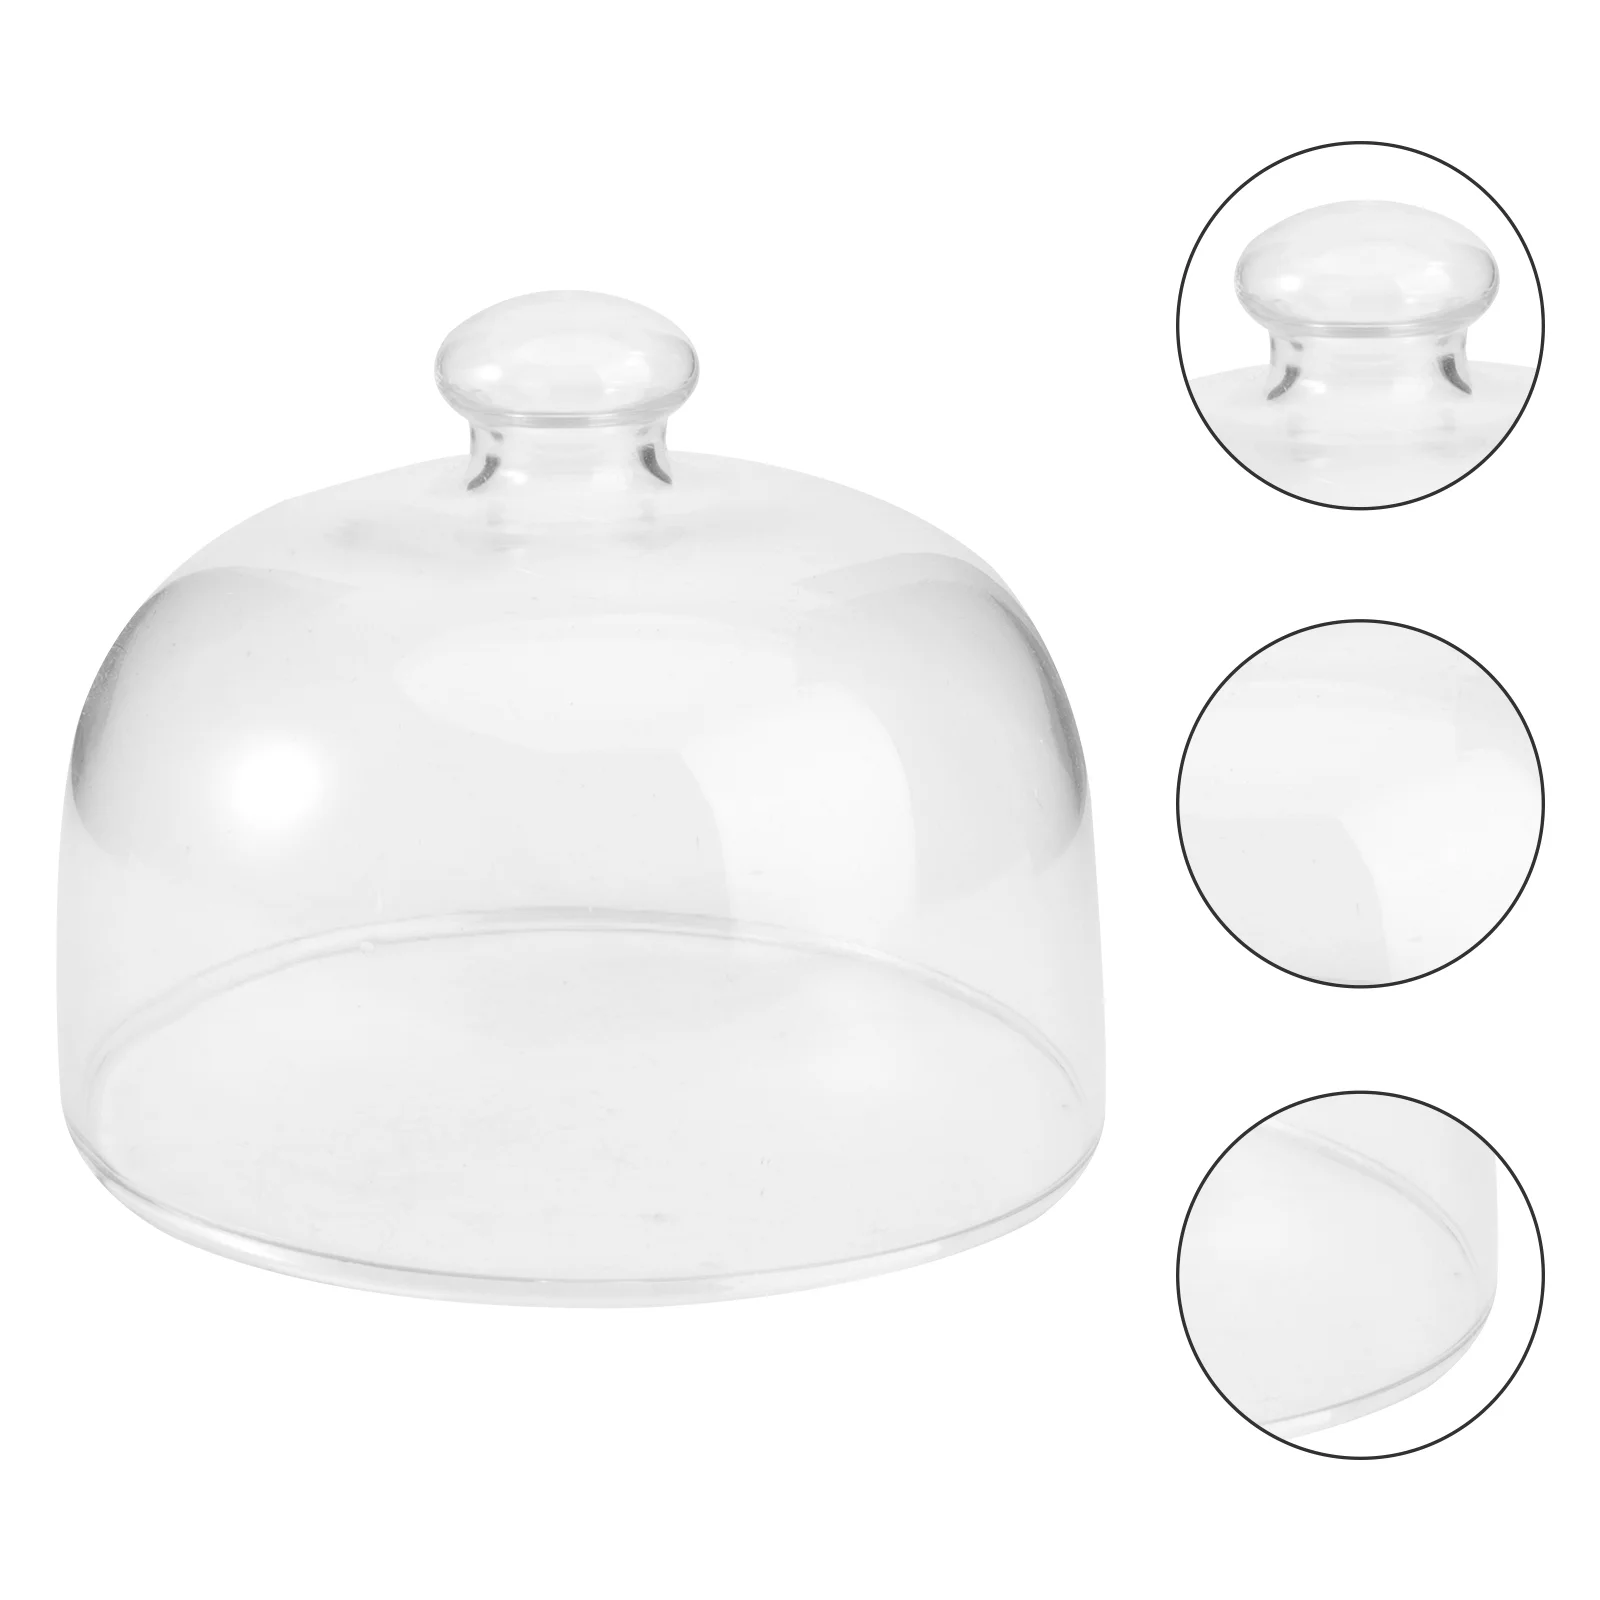 

Cover Cake Dome Stand Cupcake Glasscloche Dessertdisplay Round Storage Decorative Tray Clear Covers Protector Microwave Serving